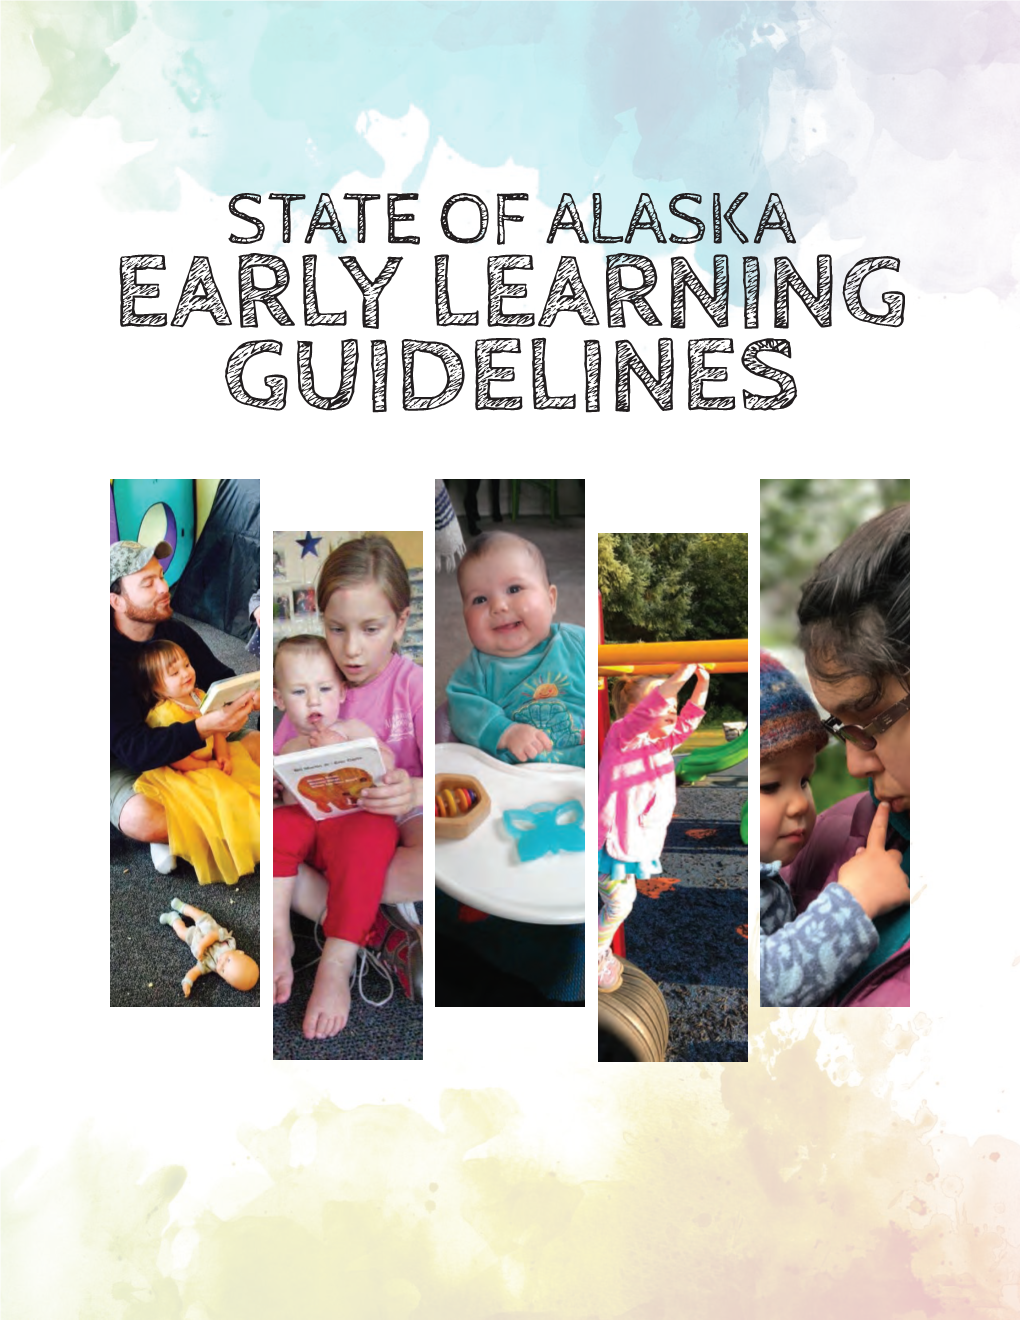 EARLY LEARNING GUIDELINES Contents